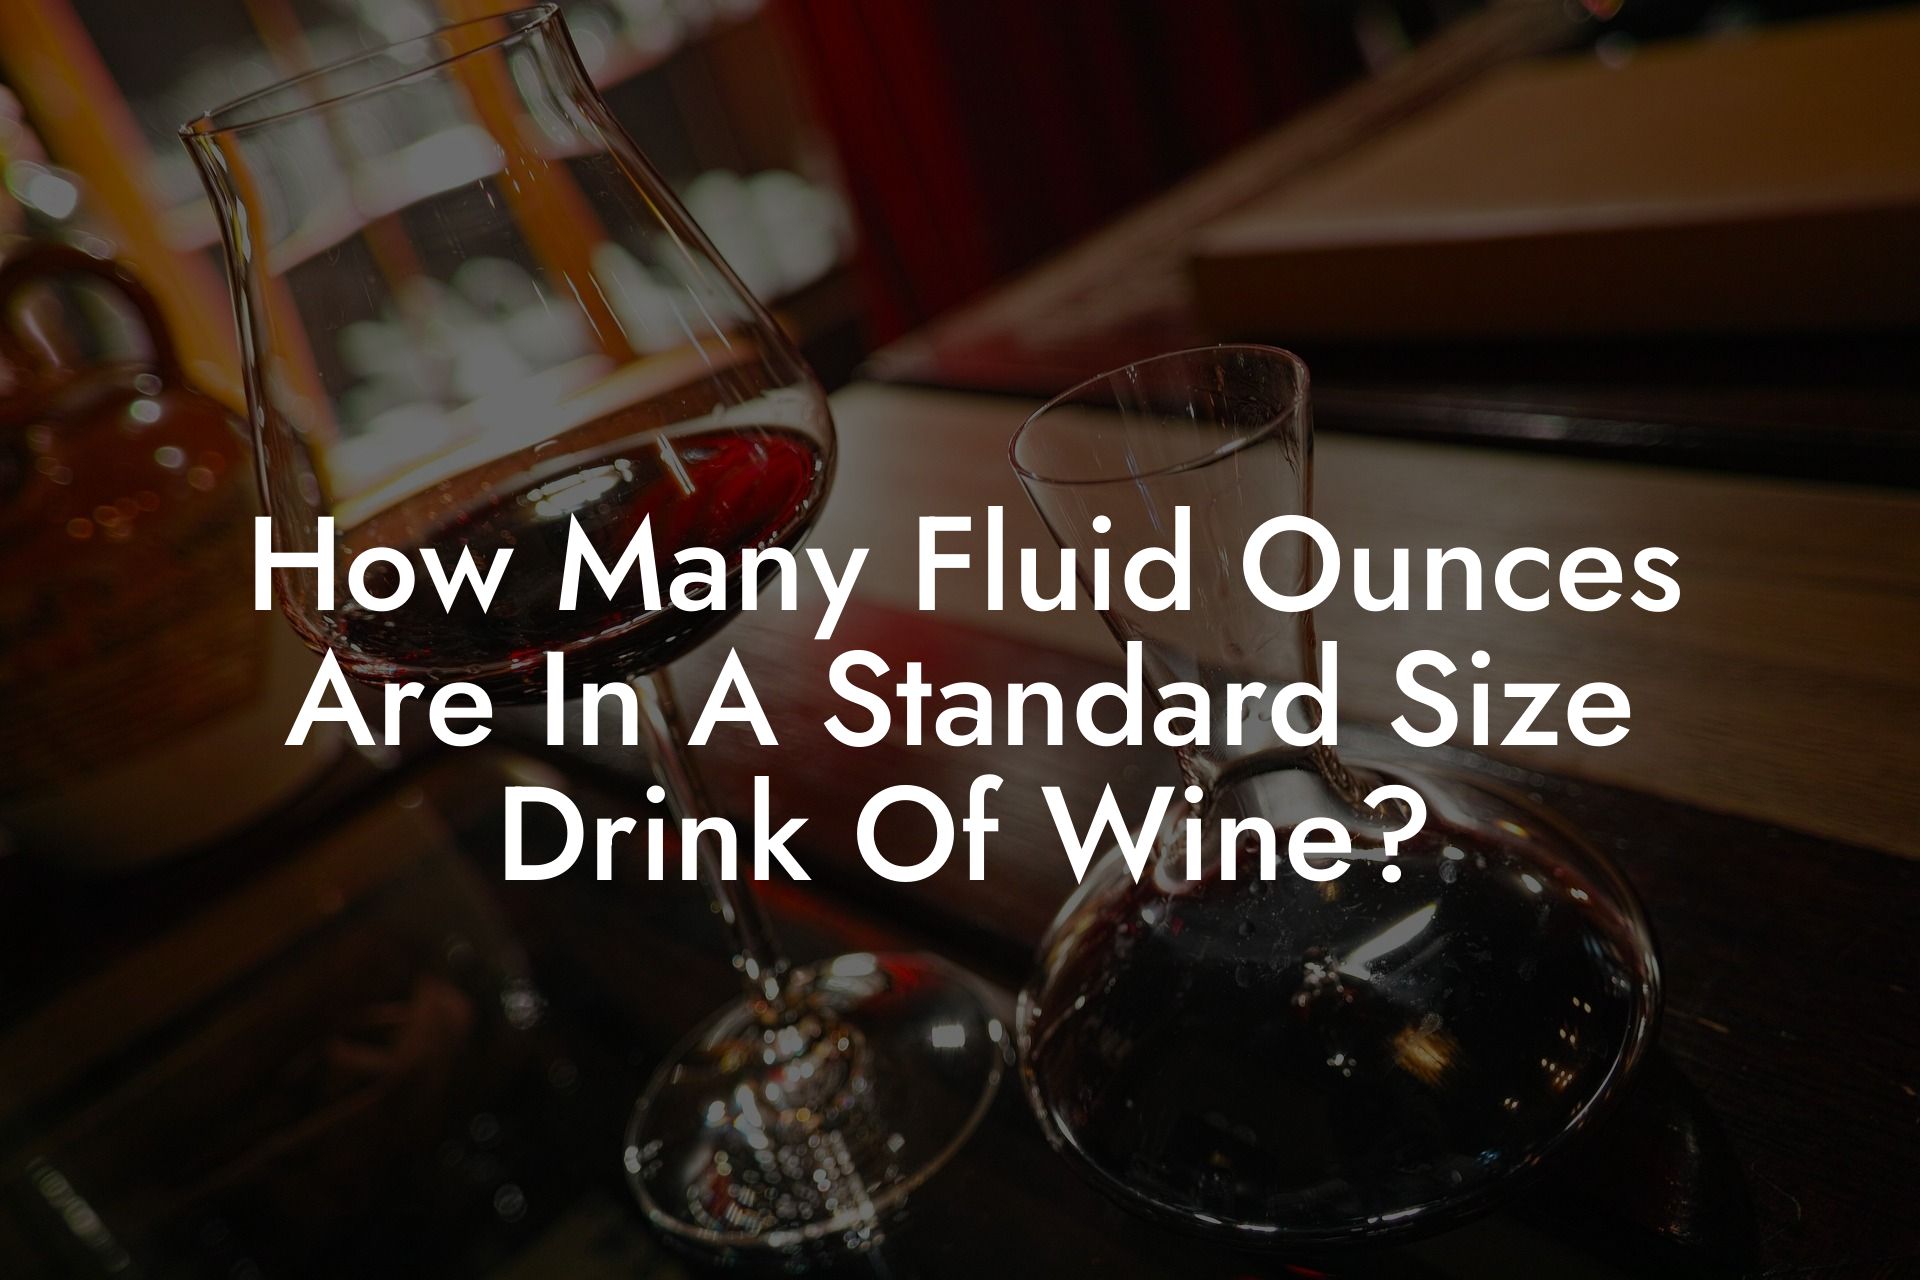 How Many Fluid Ounces Are In A Standard Size Drink Of Wine